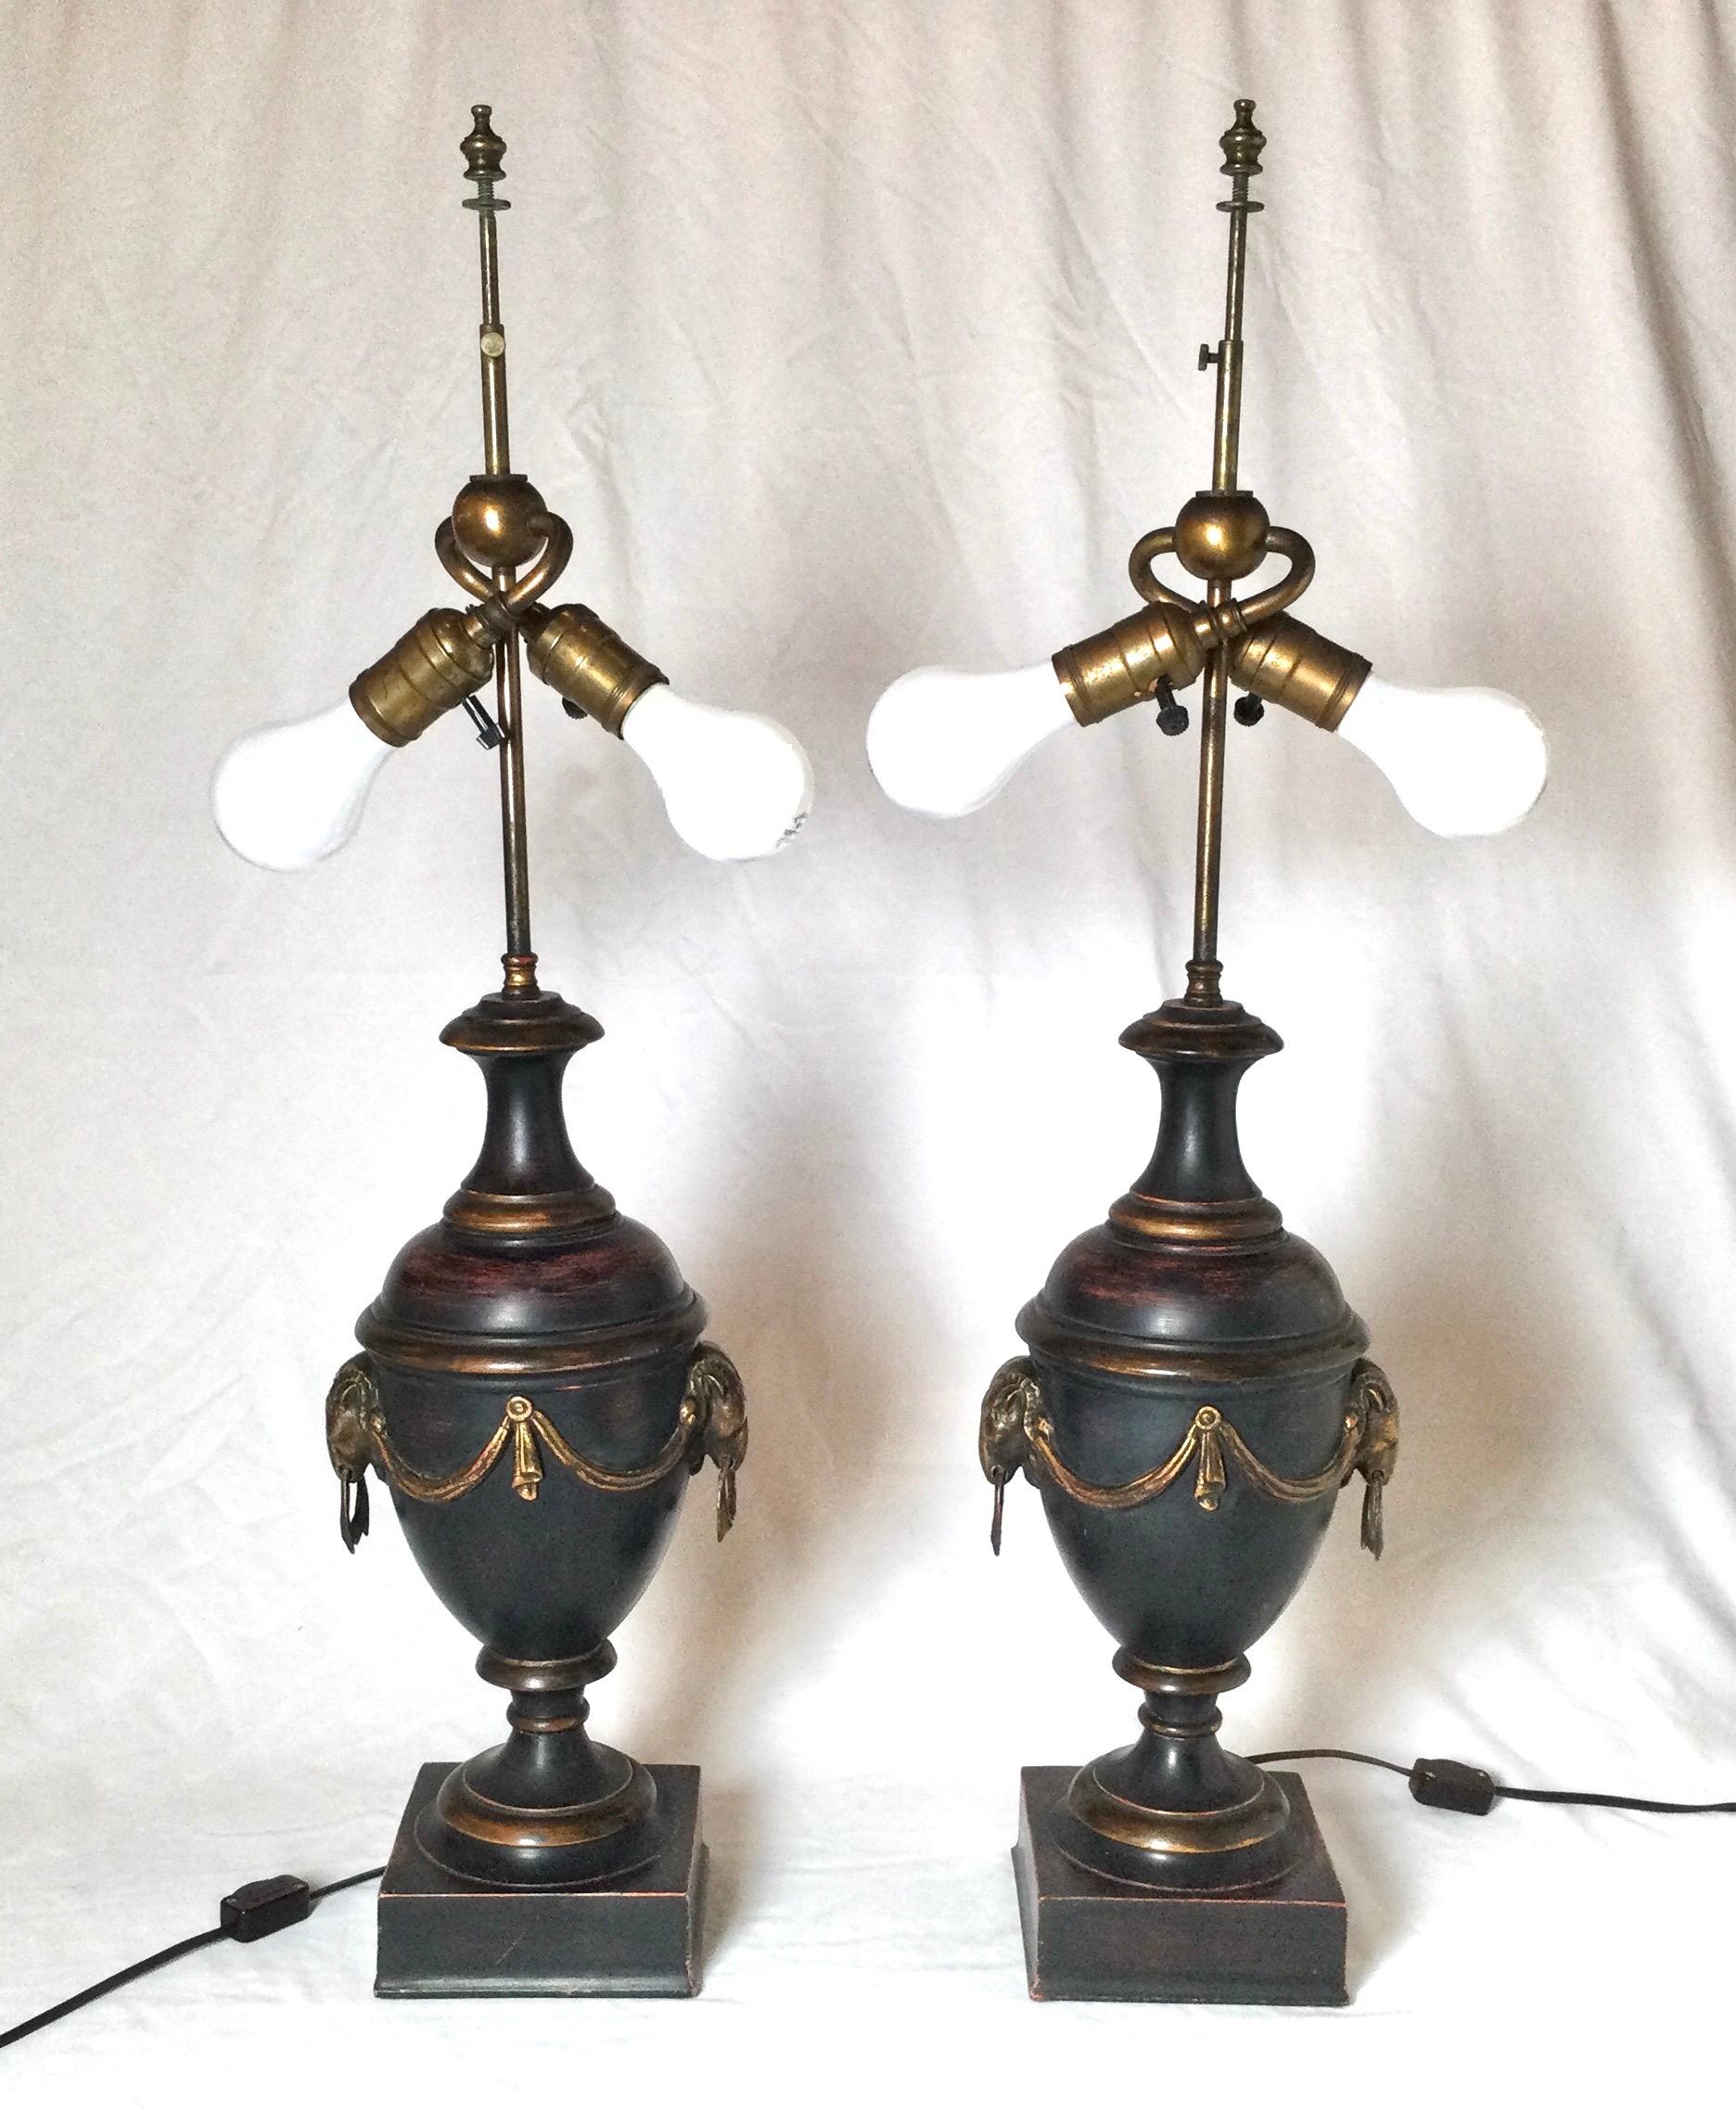 A handsome pair of urn form lamps with a painted and patinated finish. The urns with rams head handles and draped decoration on the front and back. The shades are for photographic purposes only and not included with the lamps. 29 inches tall with a